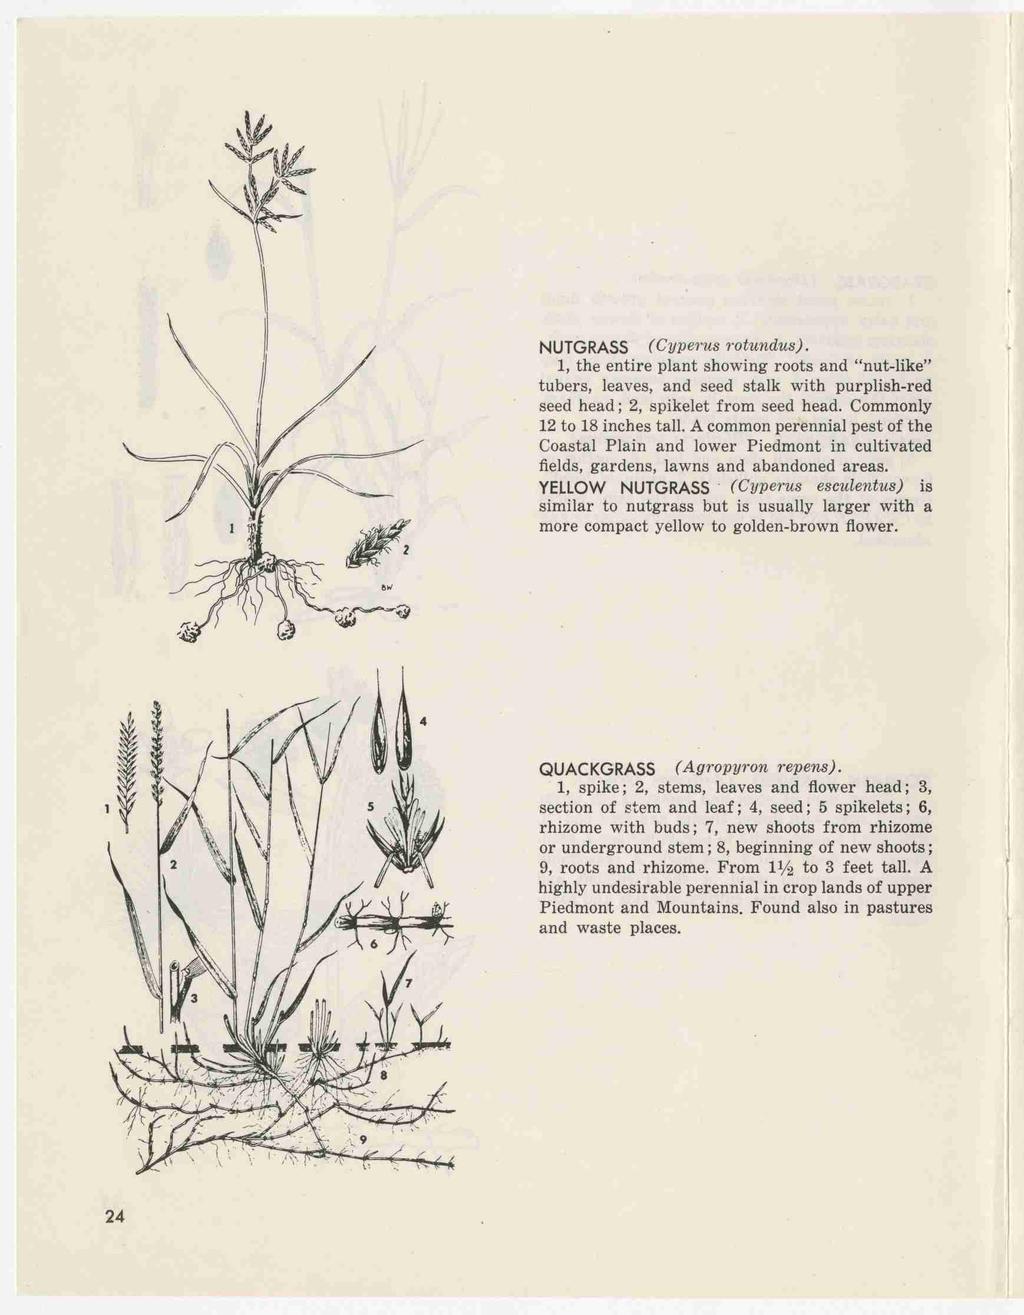 \ )) NUTGRASS (Cypems rotundus).. 1, the entire plant showing roots and nut-like / tubers, leaves, and seed stalk with purplish-red seed head; 2, spikelet from seed head.